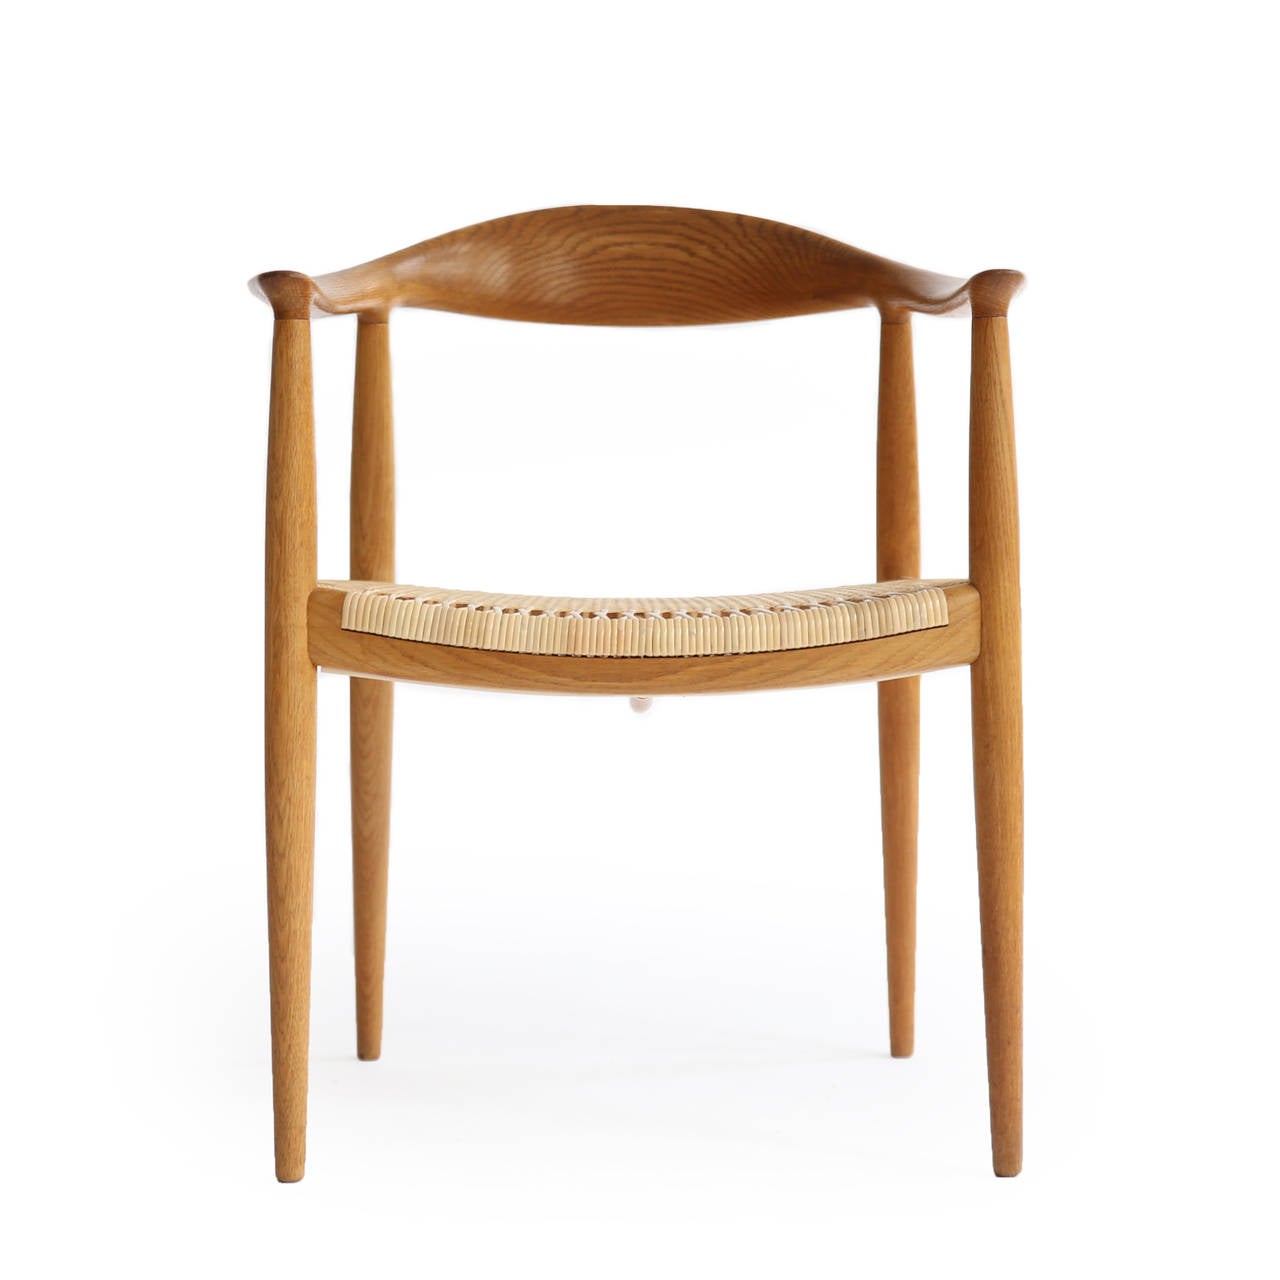 Hans J. Wegner 'The chair' with oak frame and seat with new cane. 

Designed by Wegner 1949, manufactured and burn marked by Cabm. Johannes Hansen, Denmark, model JH501.

Excellent condition.